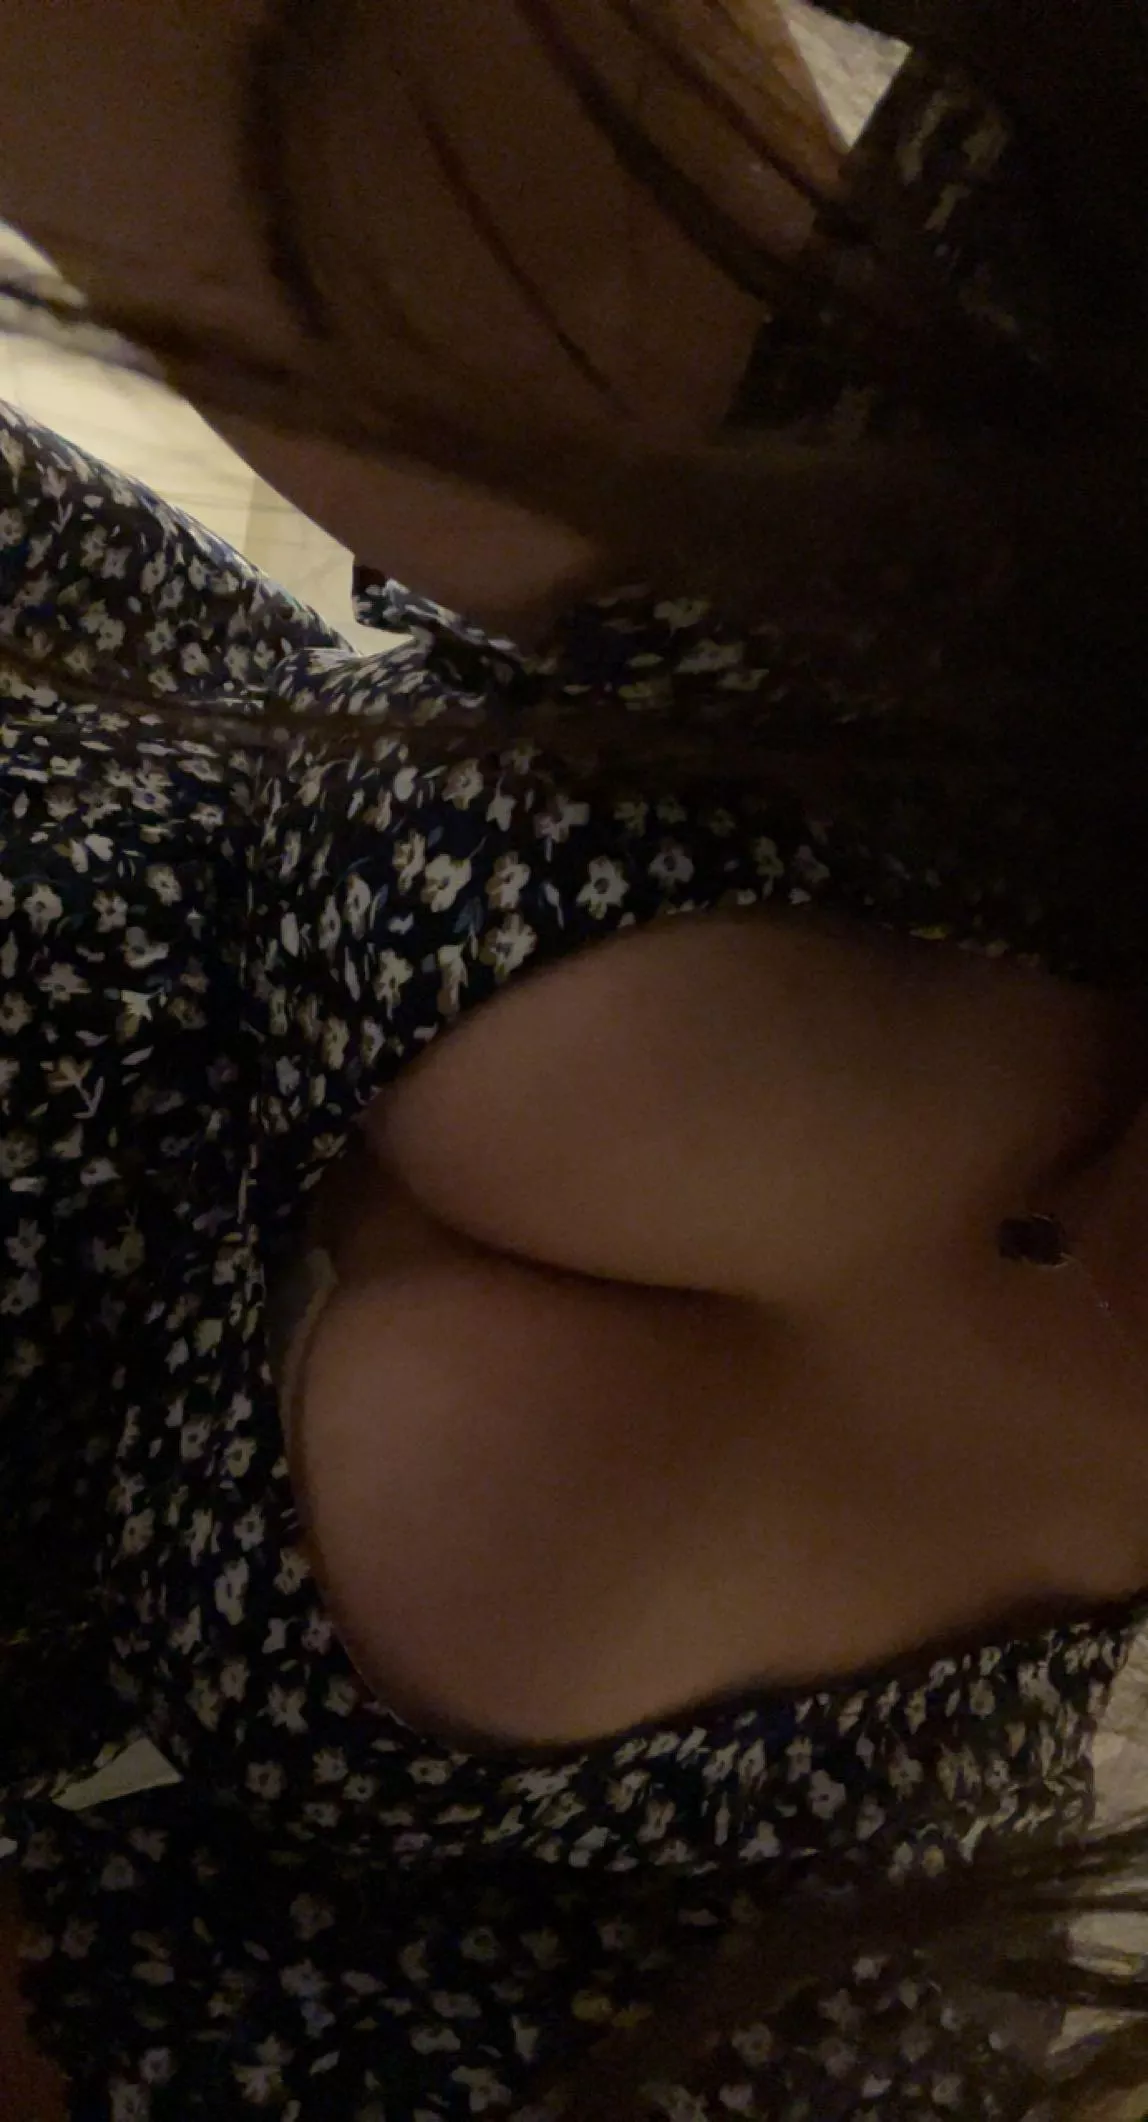 POV: I’m on top of you and the dress reveals my cleavage